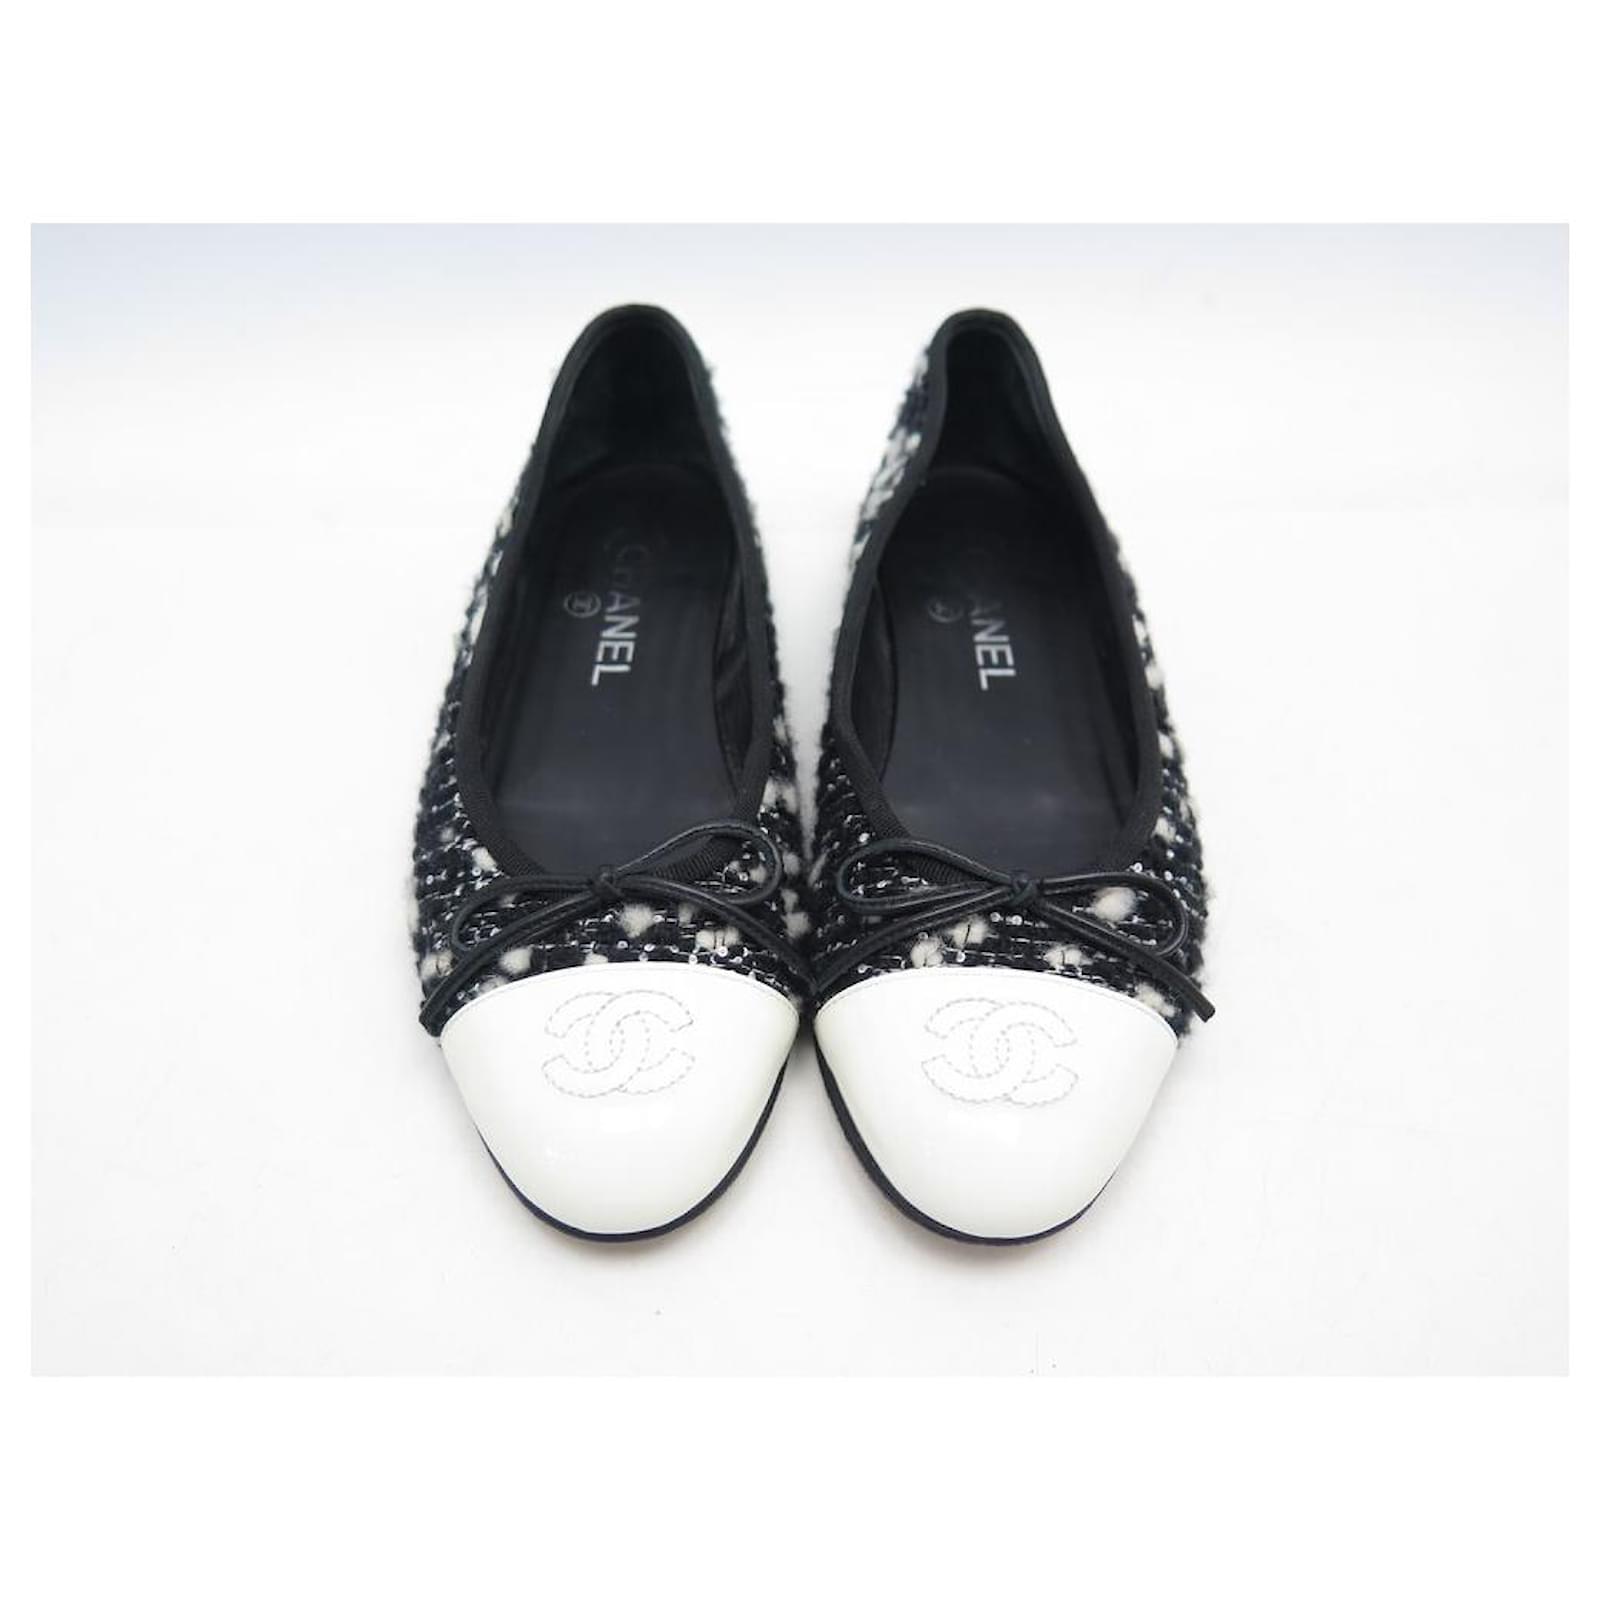 CHANEL G SHOES02819 37.5 BLACK AND WHITE TWEED BALLERINAS FLAT SHOES